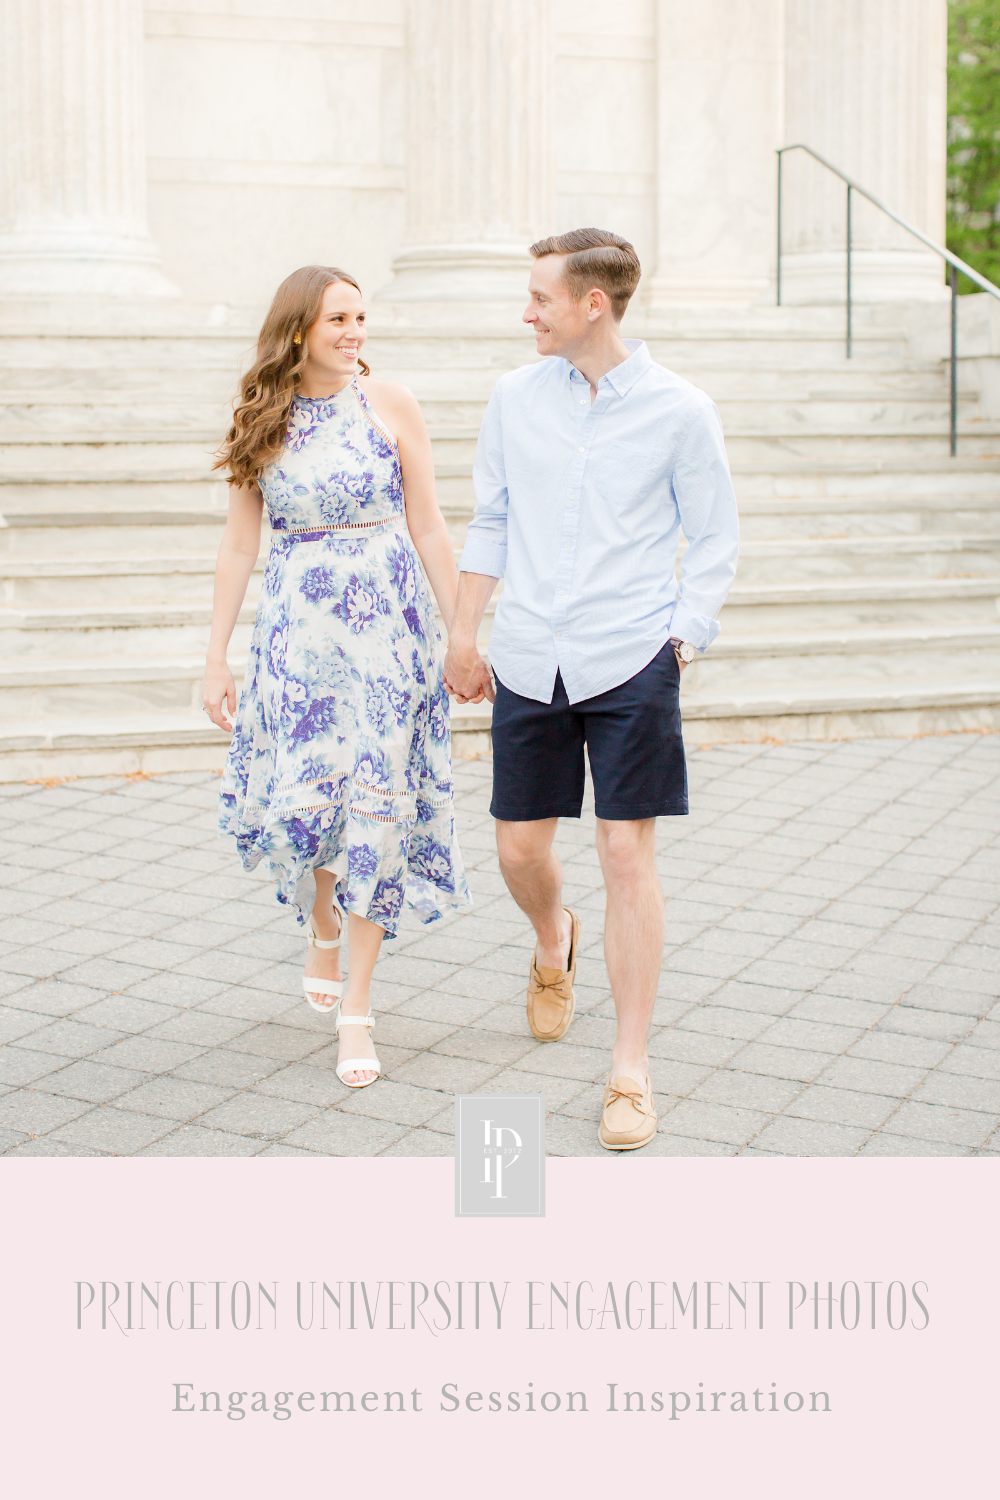 Guide to engagement photos at Princeton University in New Jersey by NJ wedding photographer Idalia Photography